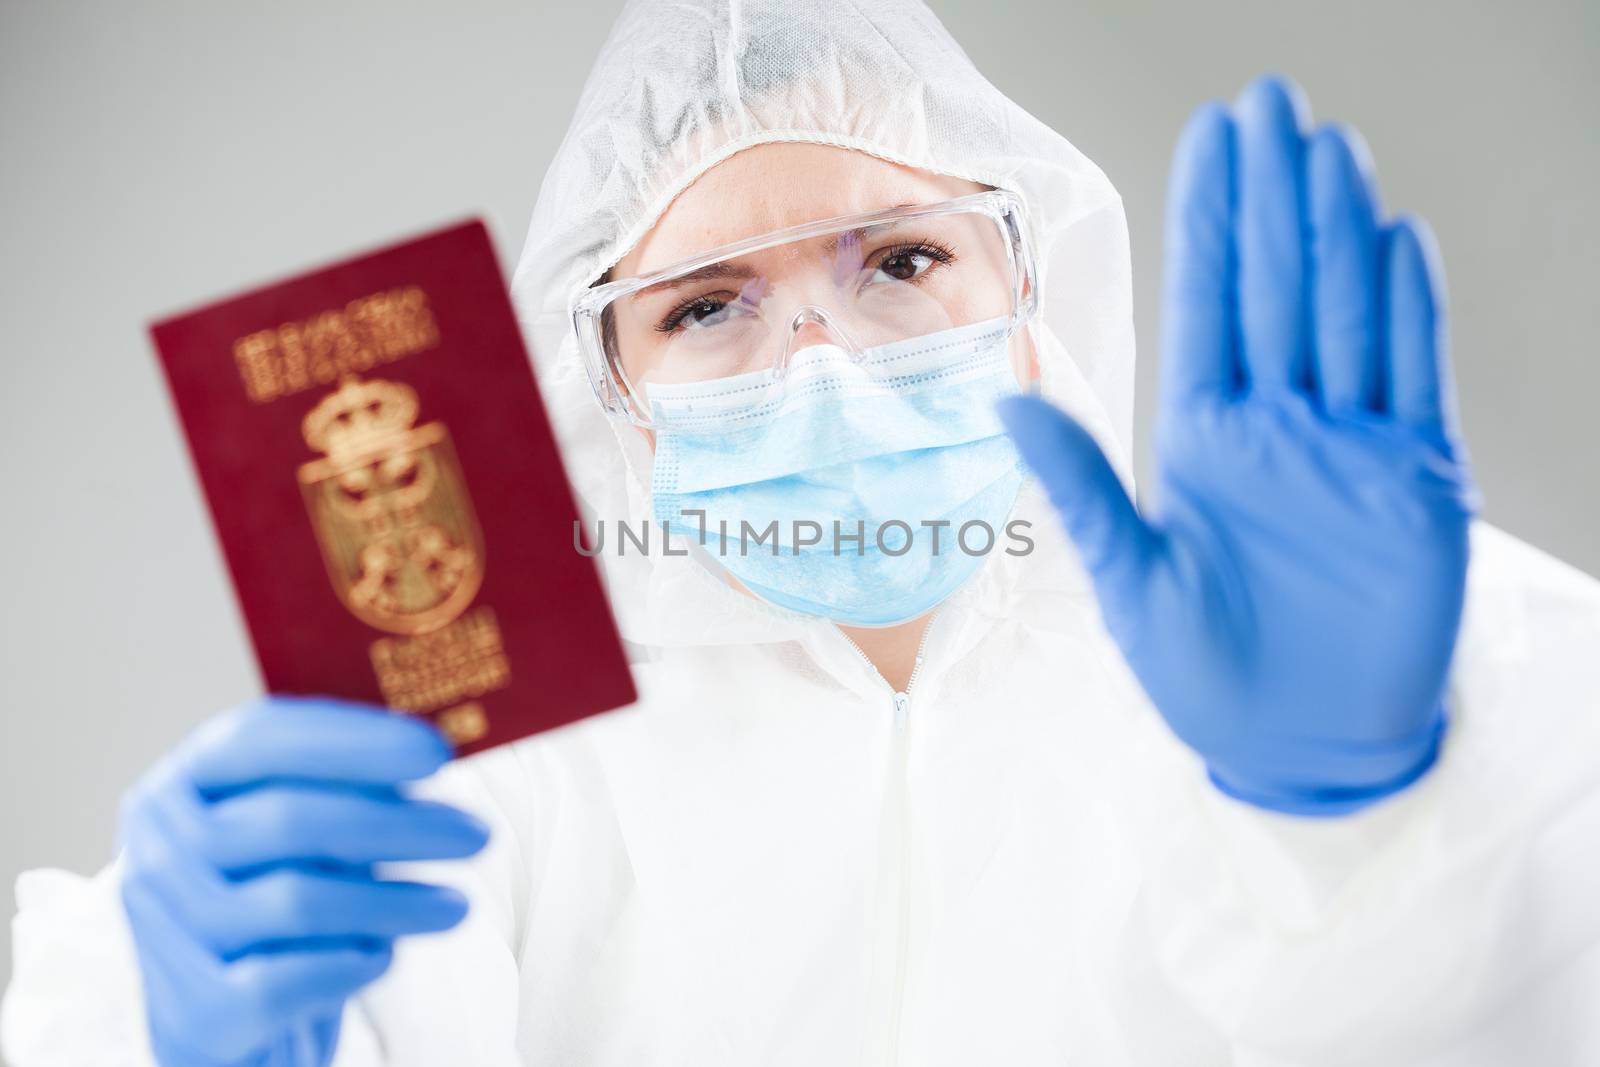 Security officer at airport customs security check holding passp by Plyushkin